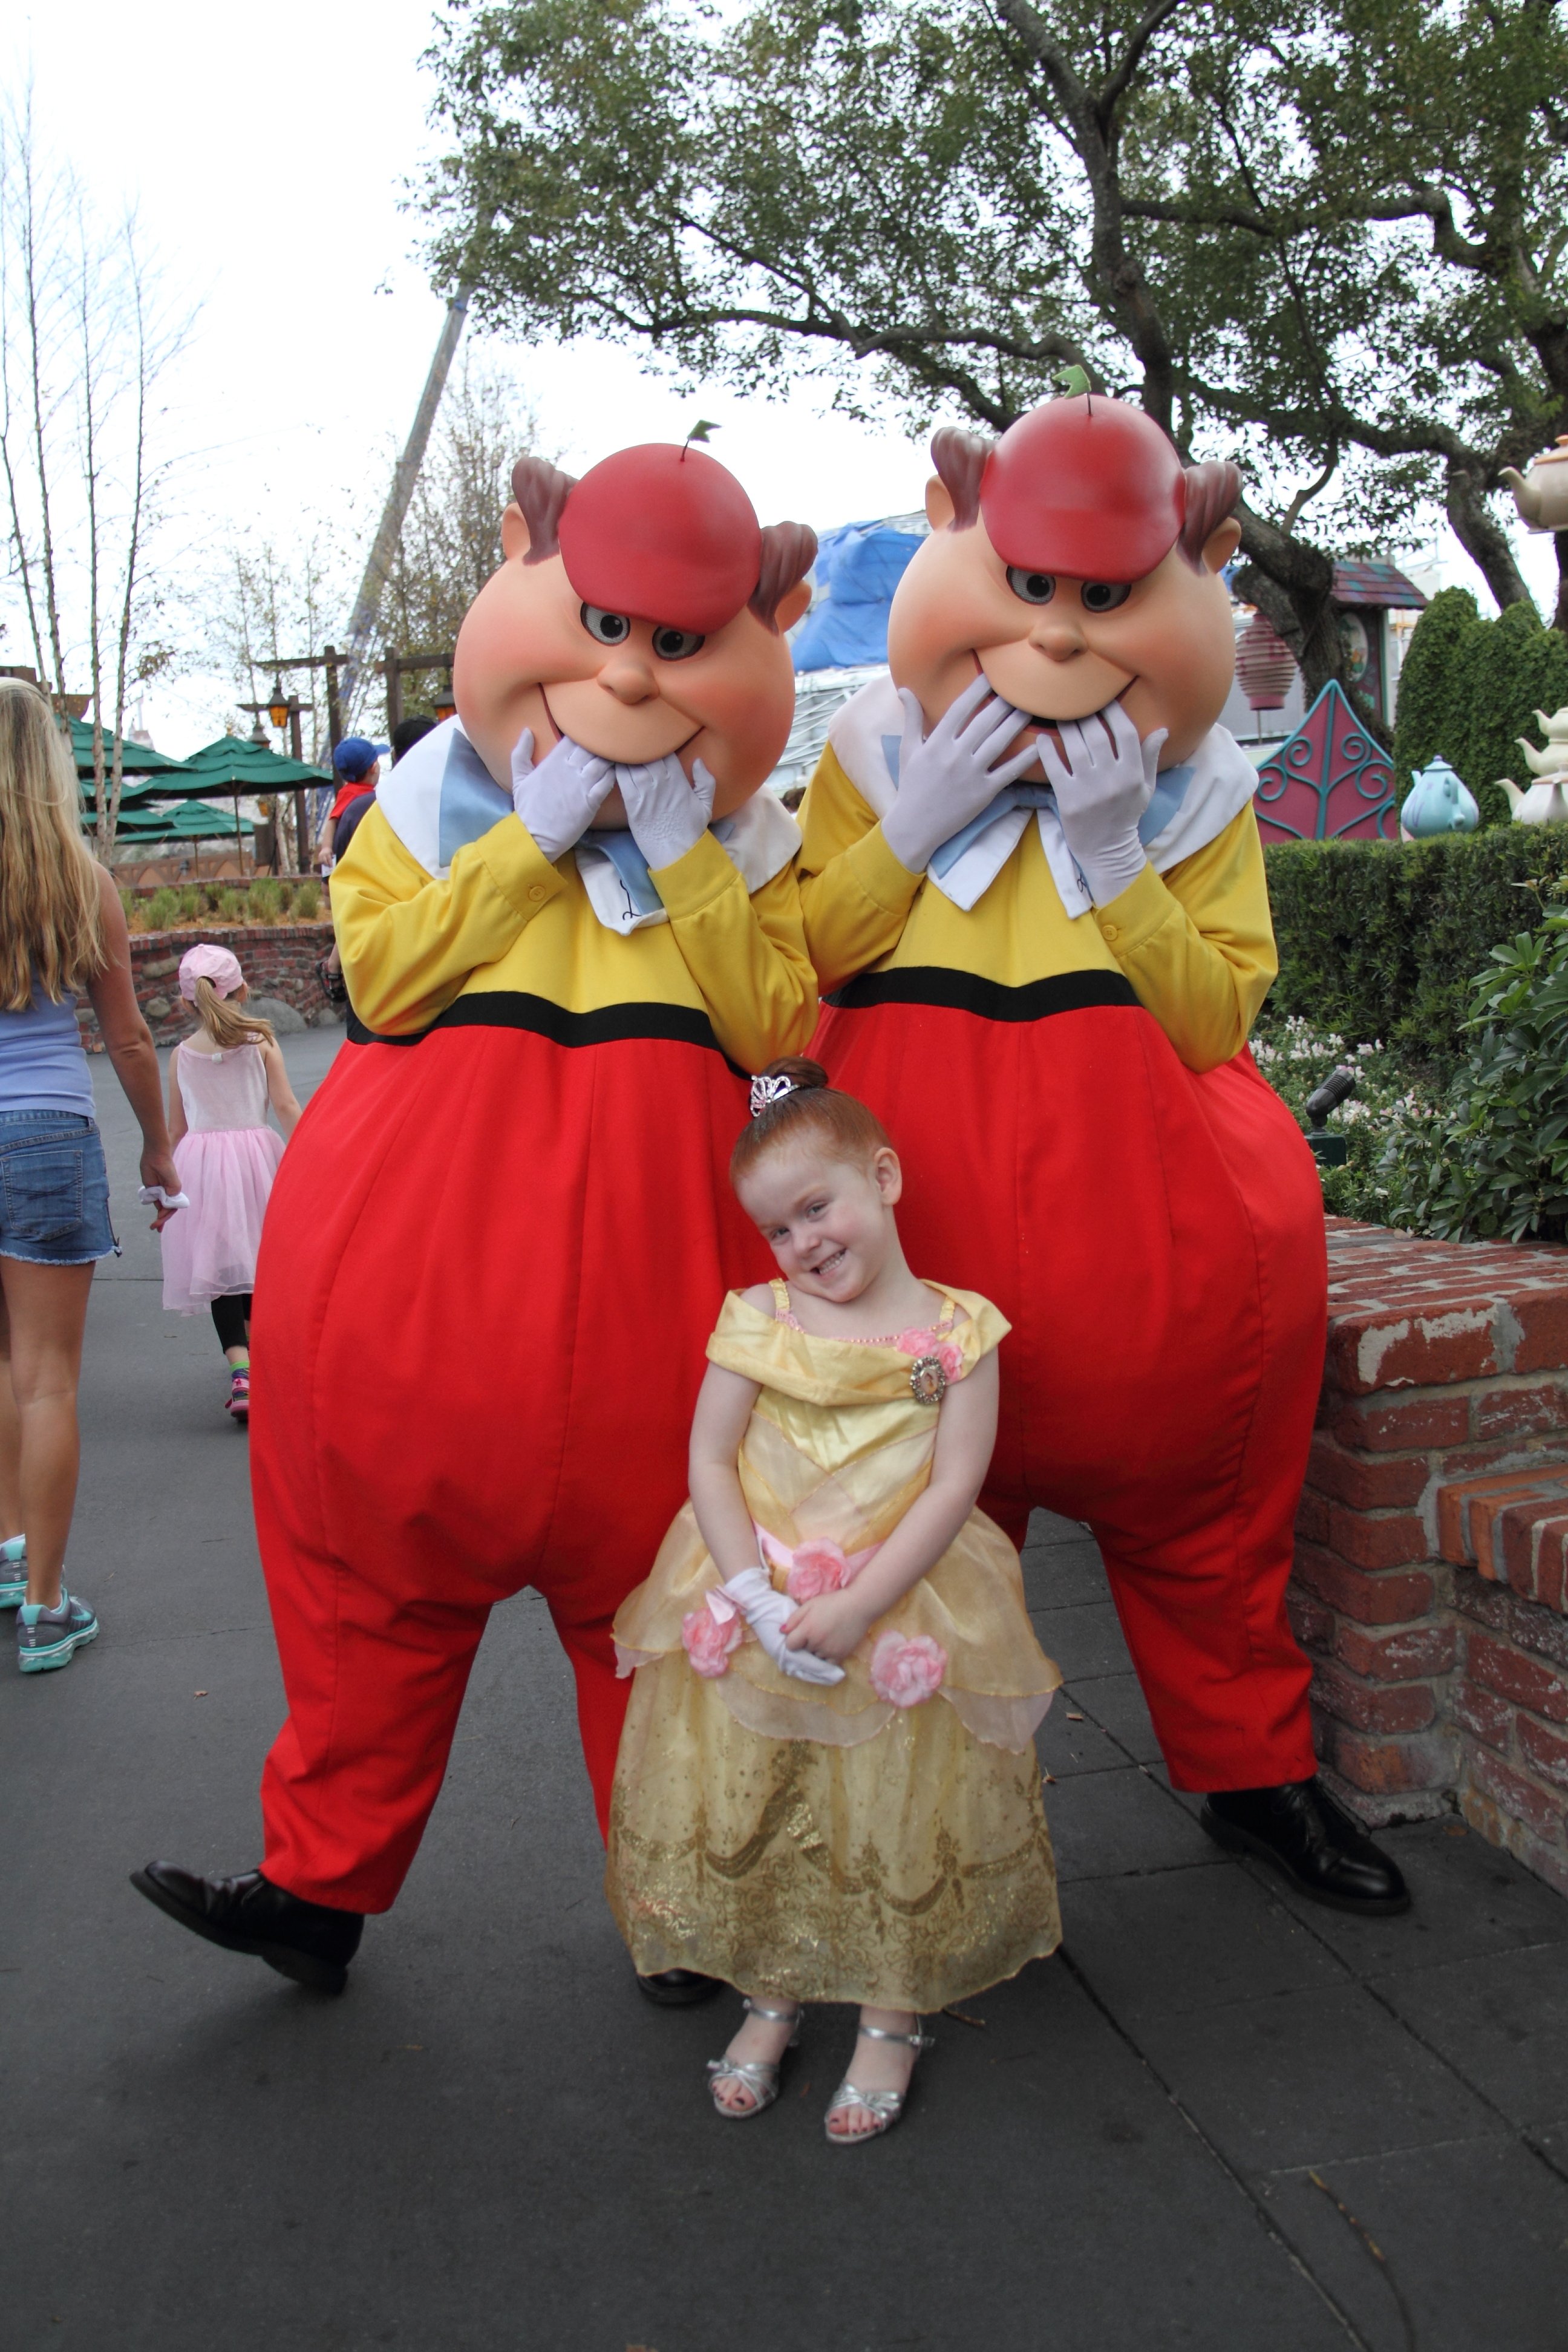 Tweedle Dee and Tweedle Dum with a lovely princess!